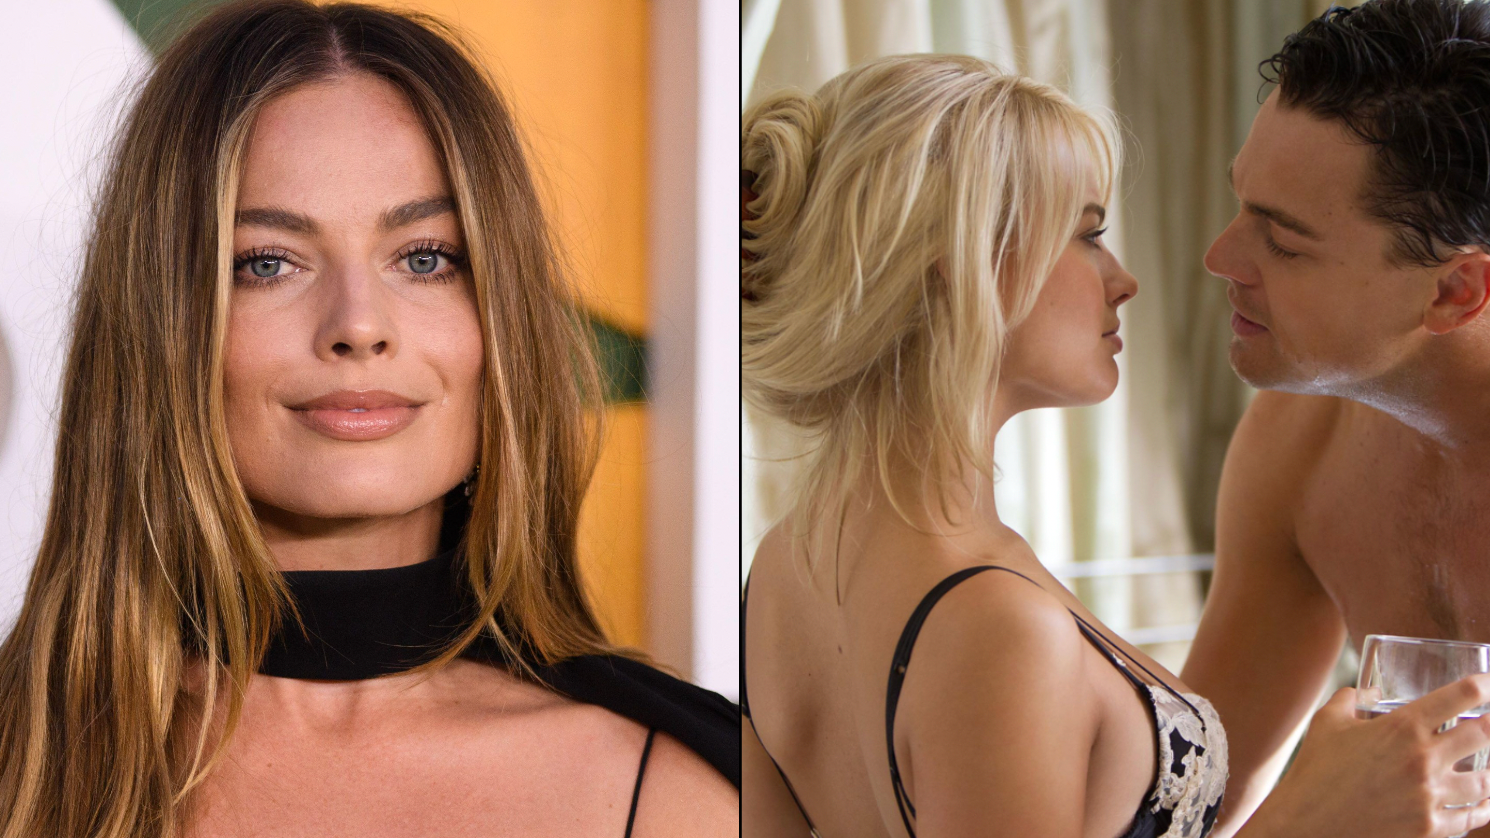 Margot Robbie Tits - Margot Robbie addresses how 'real breasts and pubic hair' are filmed during  sex scenes